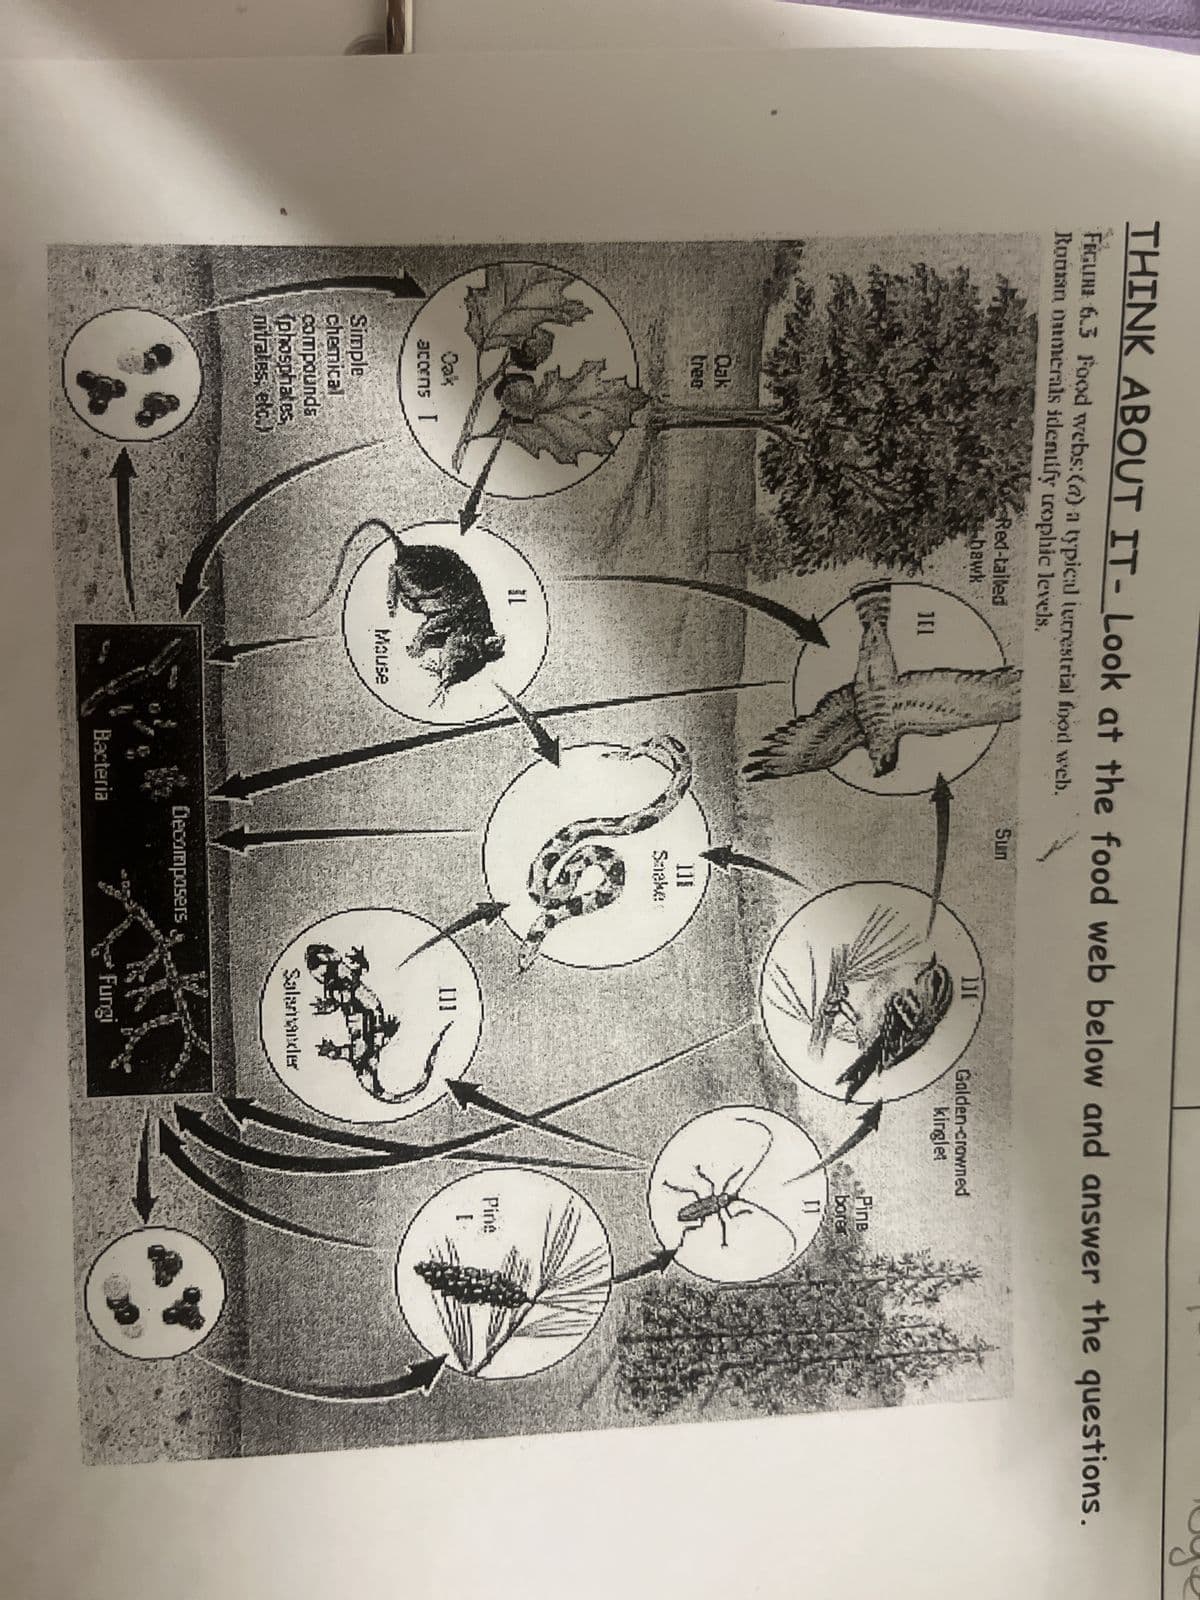 THINK ABOUT IT- Look at the food web below and answer the questions.
FIGURE 6.3 Food webs: (a) a typical terrestrial food web.
Roman numerals identify trophic levels.
Oak
trea
Cak
acons [
Simple
chemical
compounds
(phosphates,
nitrates, etc.)
Red-tailed
hawk
][1
L
Mause
Bacteria
Sun
l][
Golden-crowned
kinglet
Snake
Decomposers
[]]
Salamander
Fungi
Pine
bore
I]
Pine
[